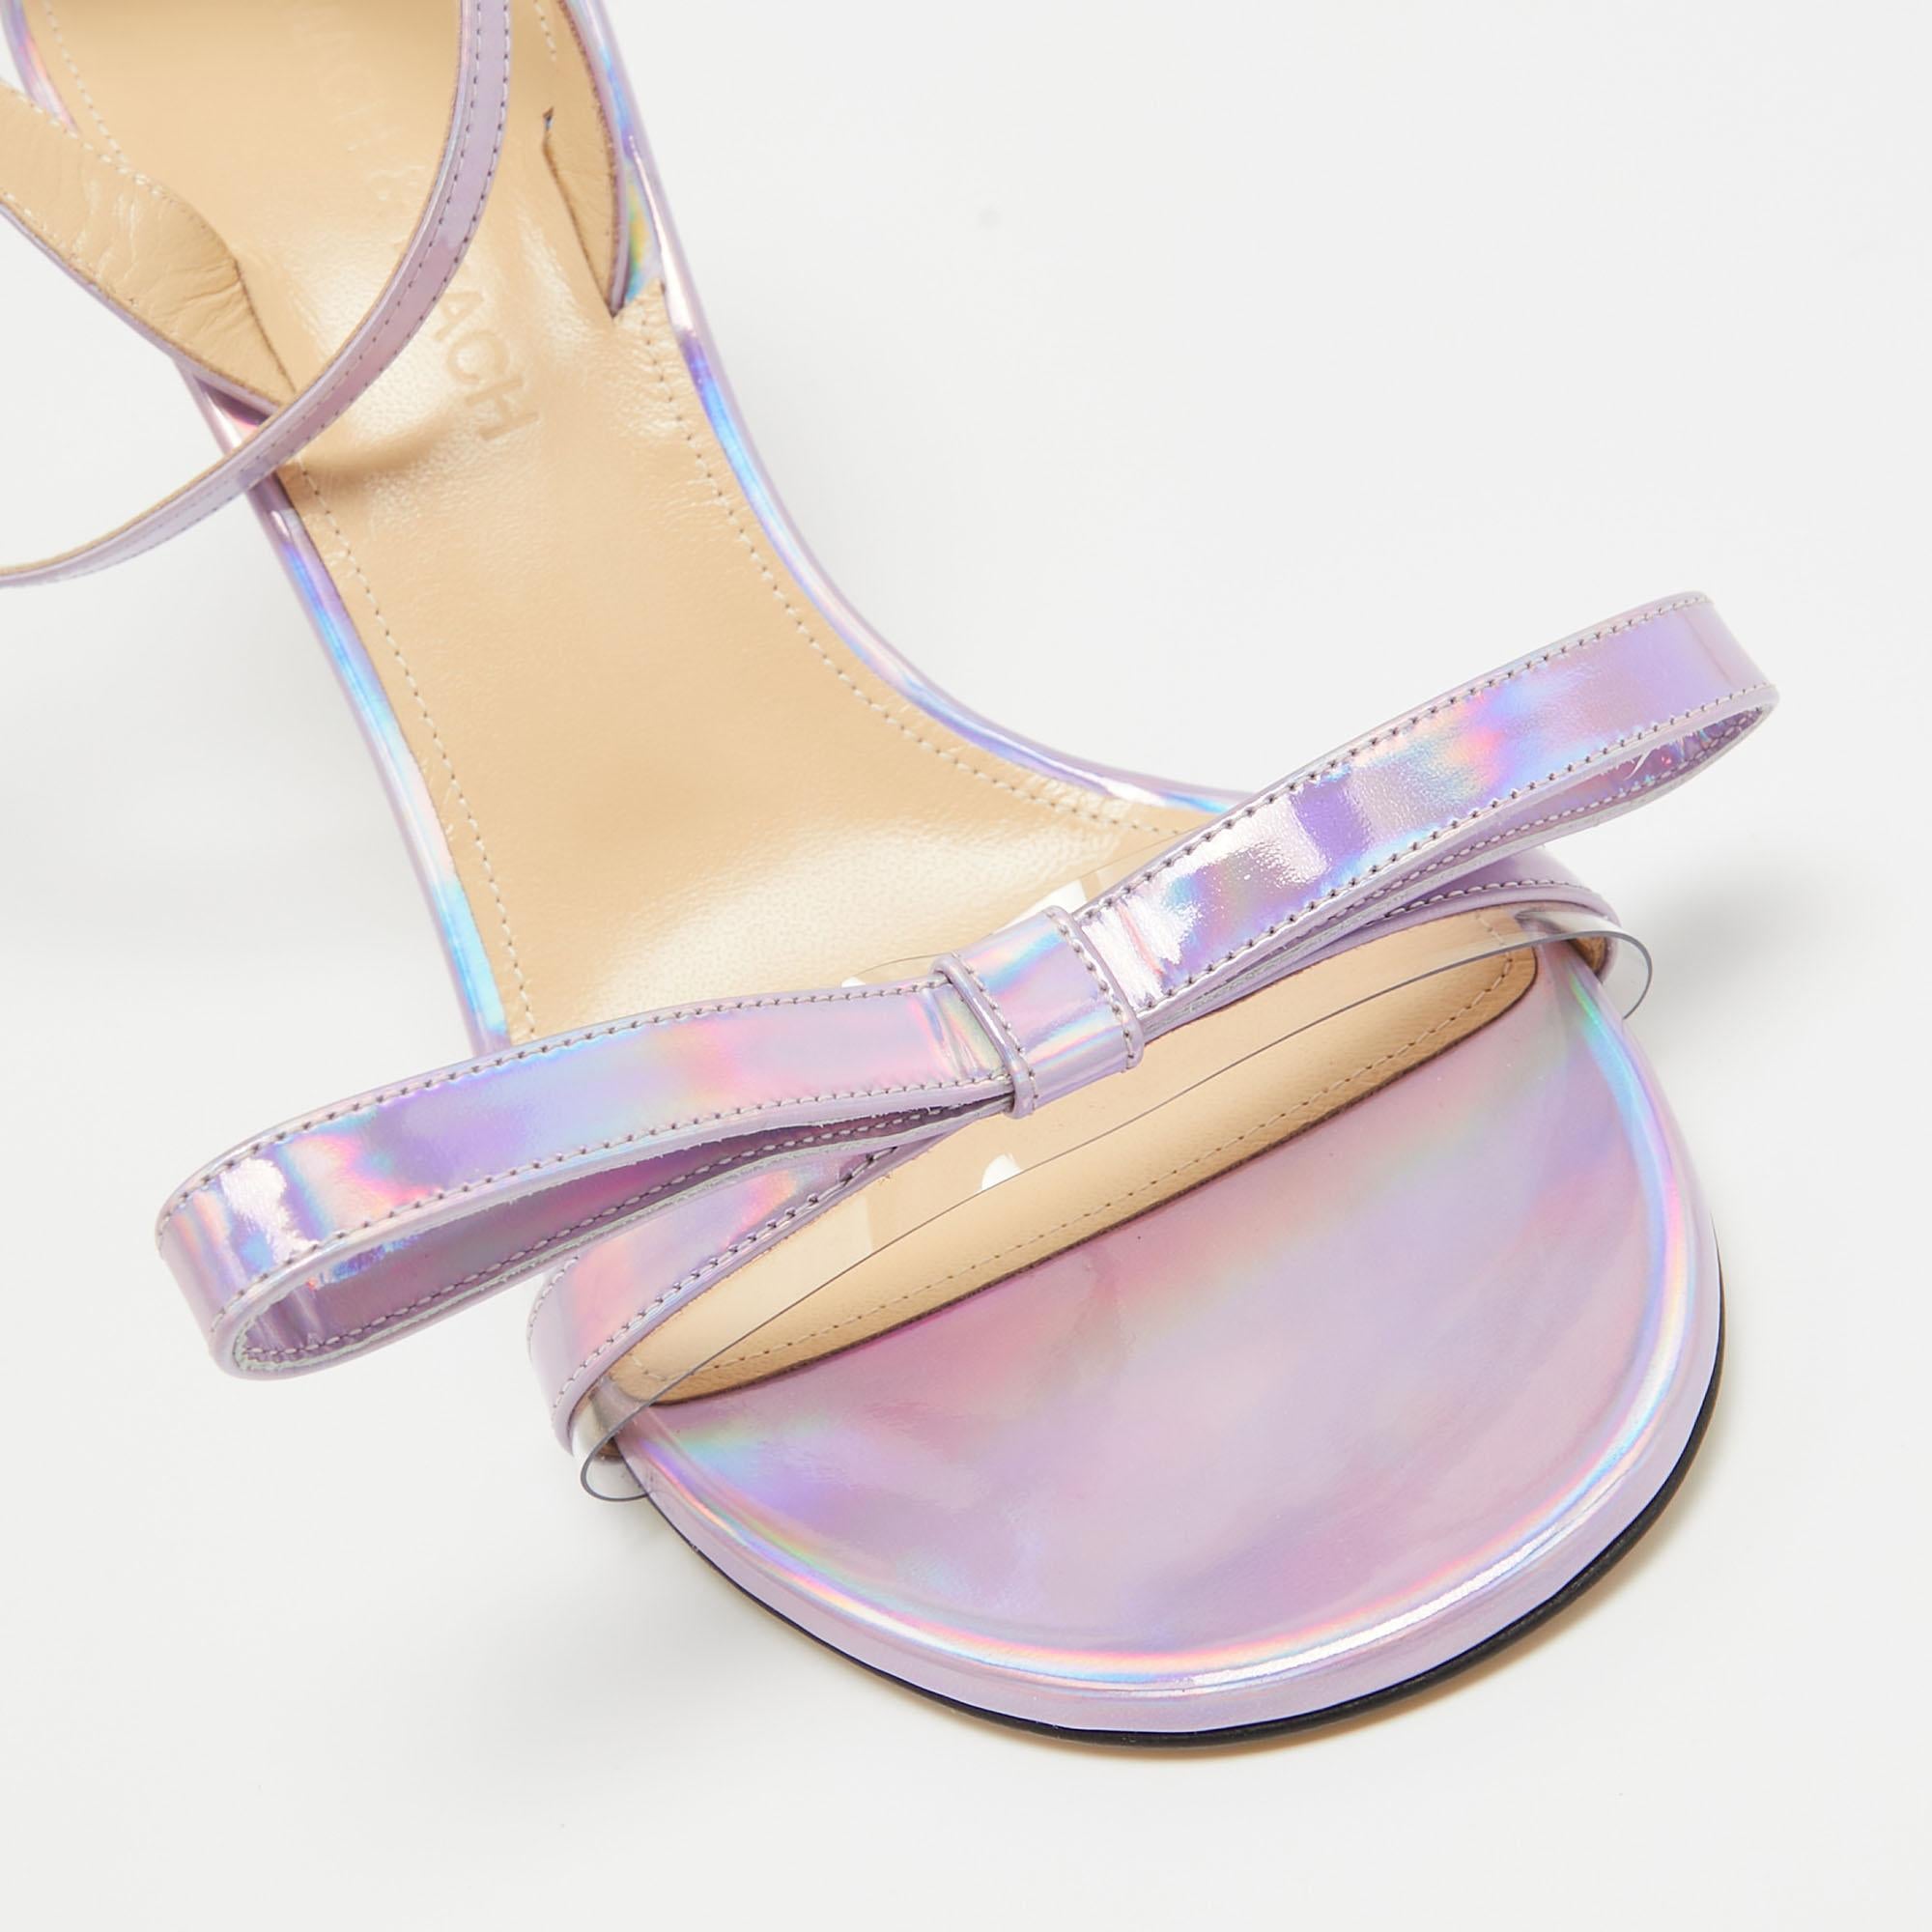 Mach & Mach Iridescent Purple Patent Leather and PVC French Bow Sandals Size 37. For Sale 2